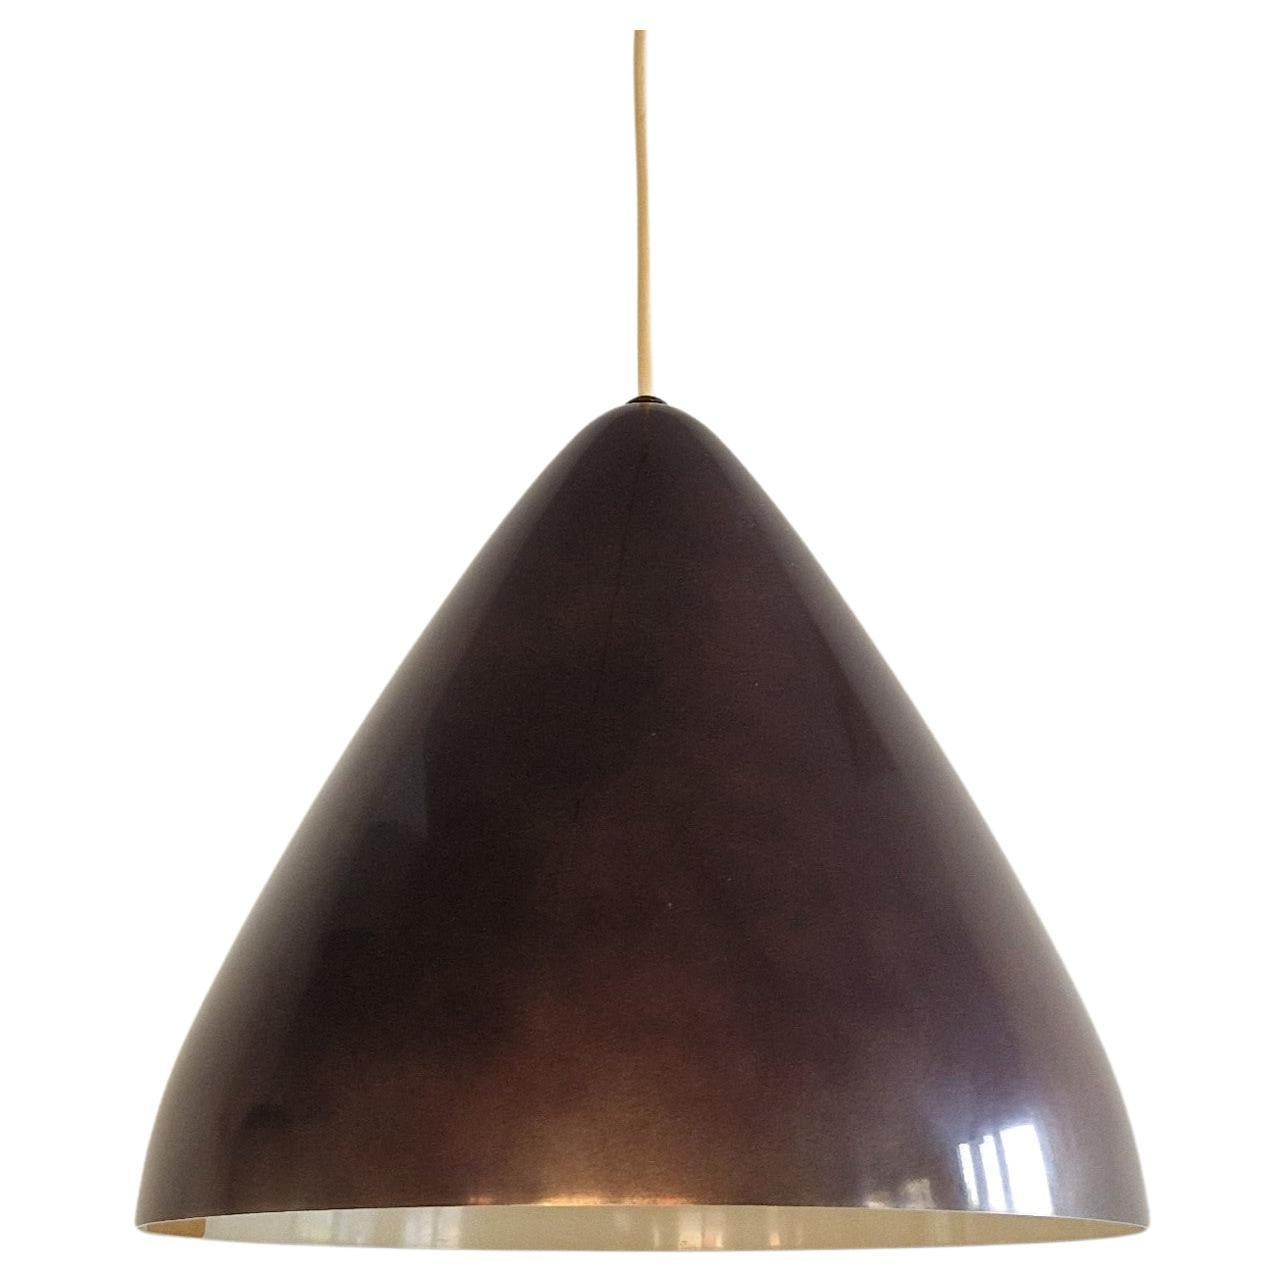 Dark wine red conical pendant lamp by Lisa Johansson-Pape for Orno, Finland 1960 For Sale